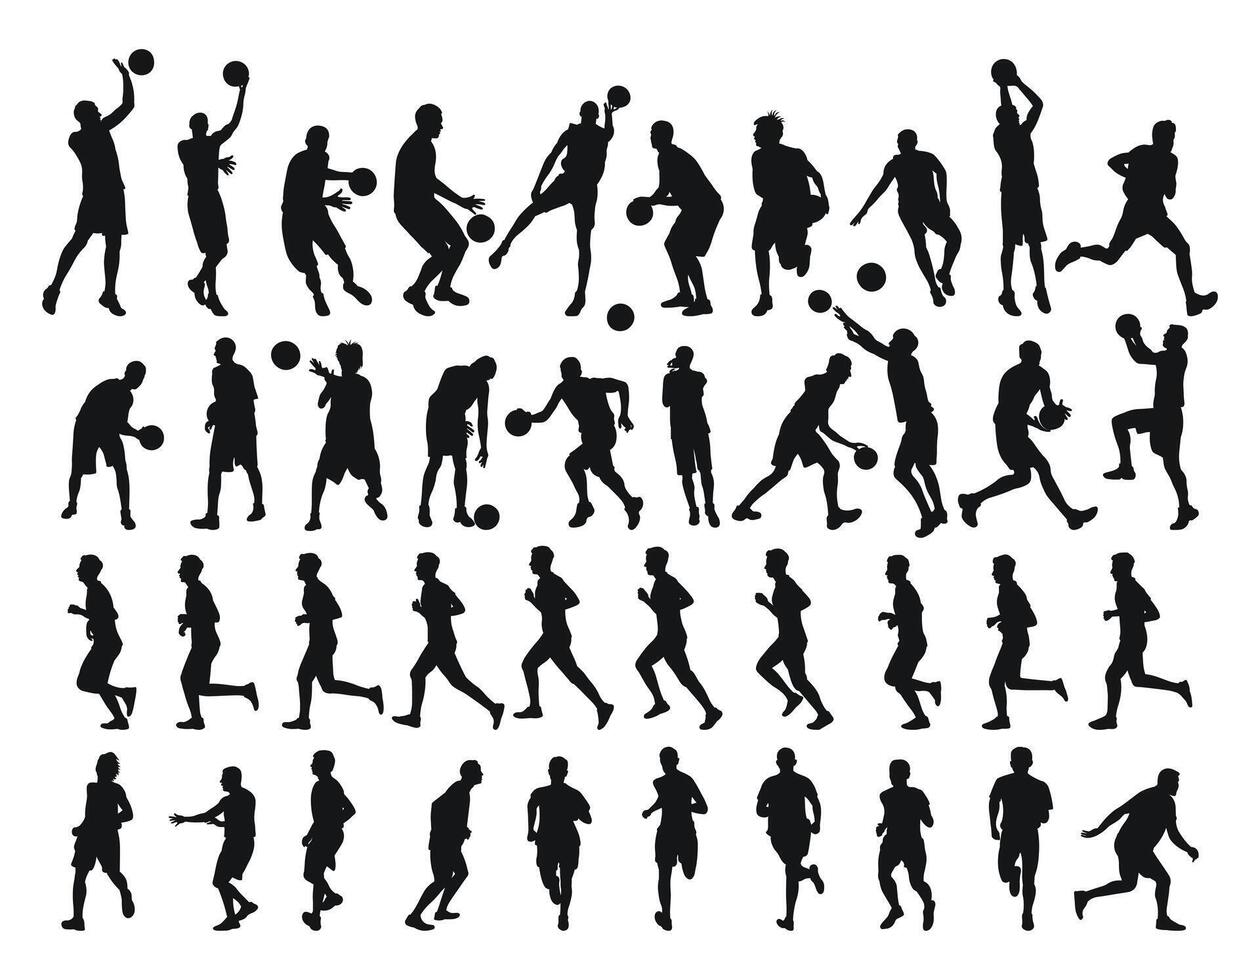 Large collection of male basketball players silhouettes, athletes runners. Basketball, athletics, running, cross, sprinting, jogging vector